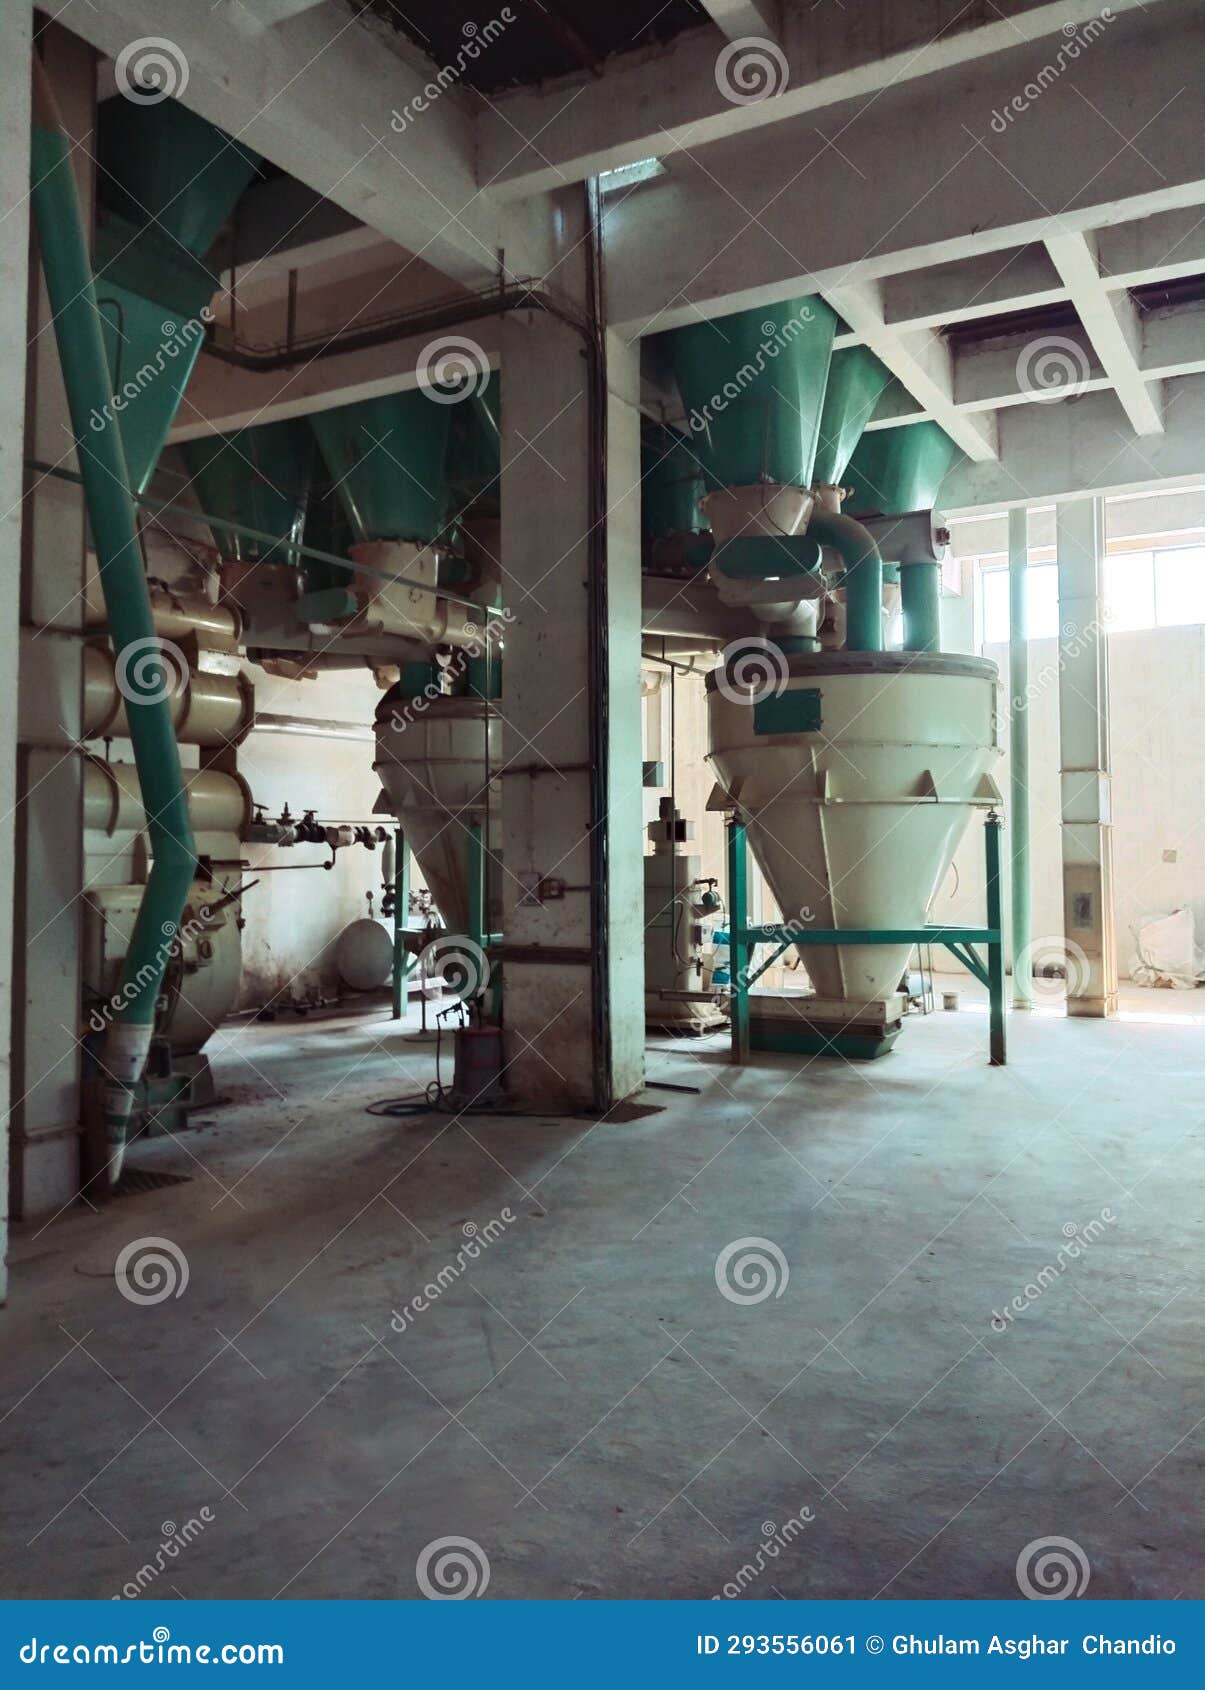 feed mill plant poultry feed-pellet processing unit machinery factory animal feed-mills provenderie, fabrica piensos, image photo